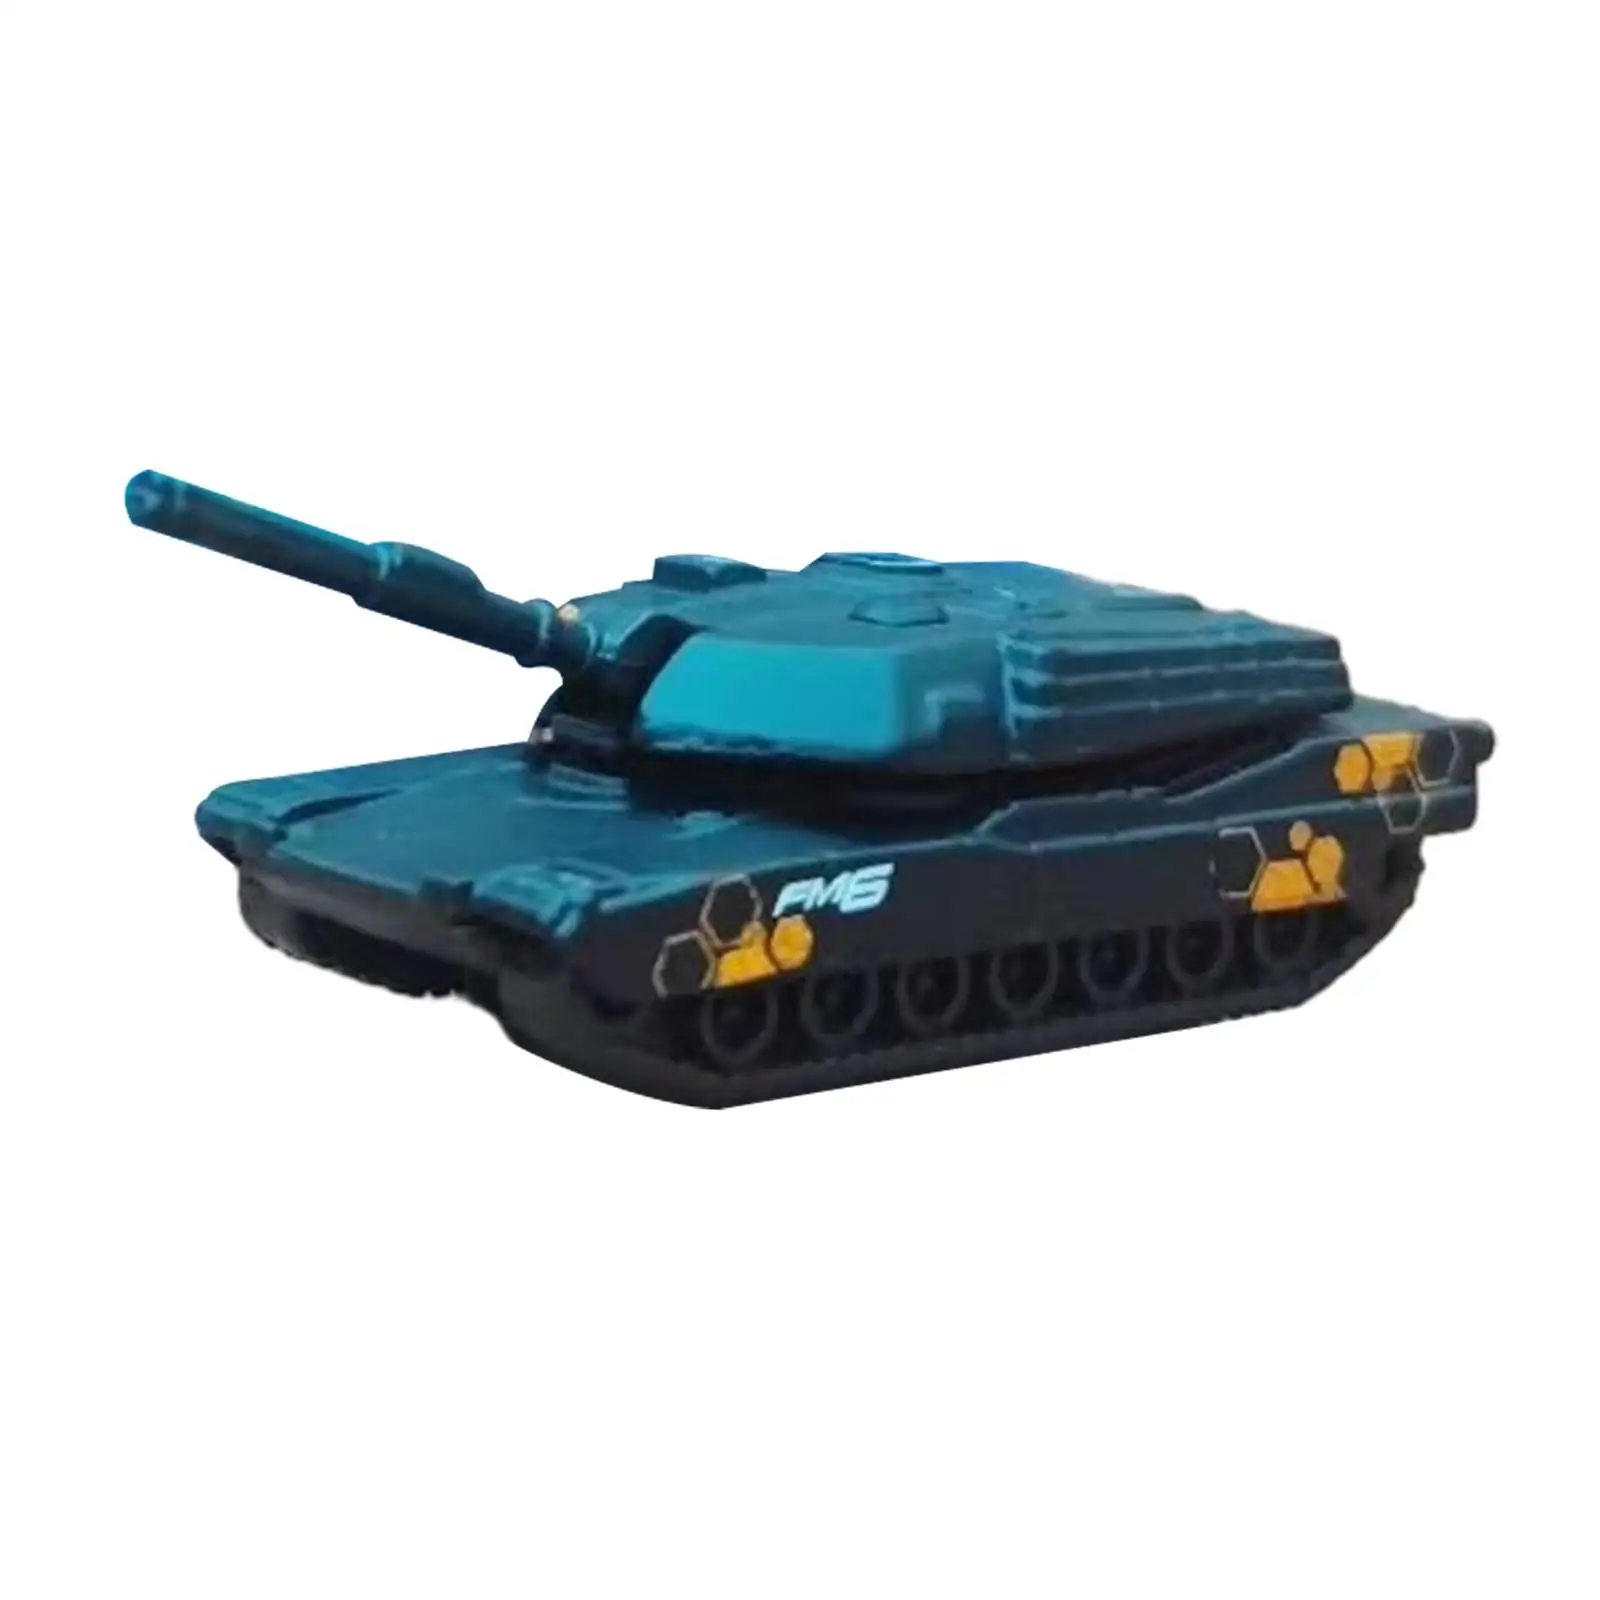 1:64 Scale Miniature Tank Model Tabletop Decor Collection Kids Adult Toys Car Model Ornaments for Boys Kids Teens Adults Gifts